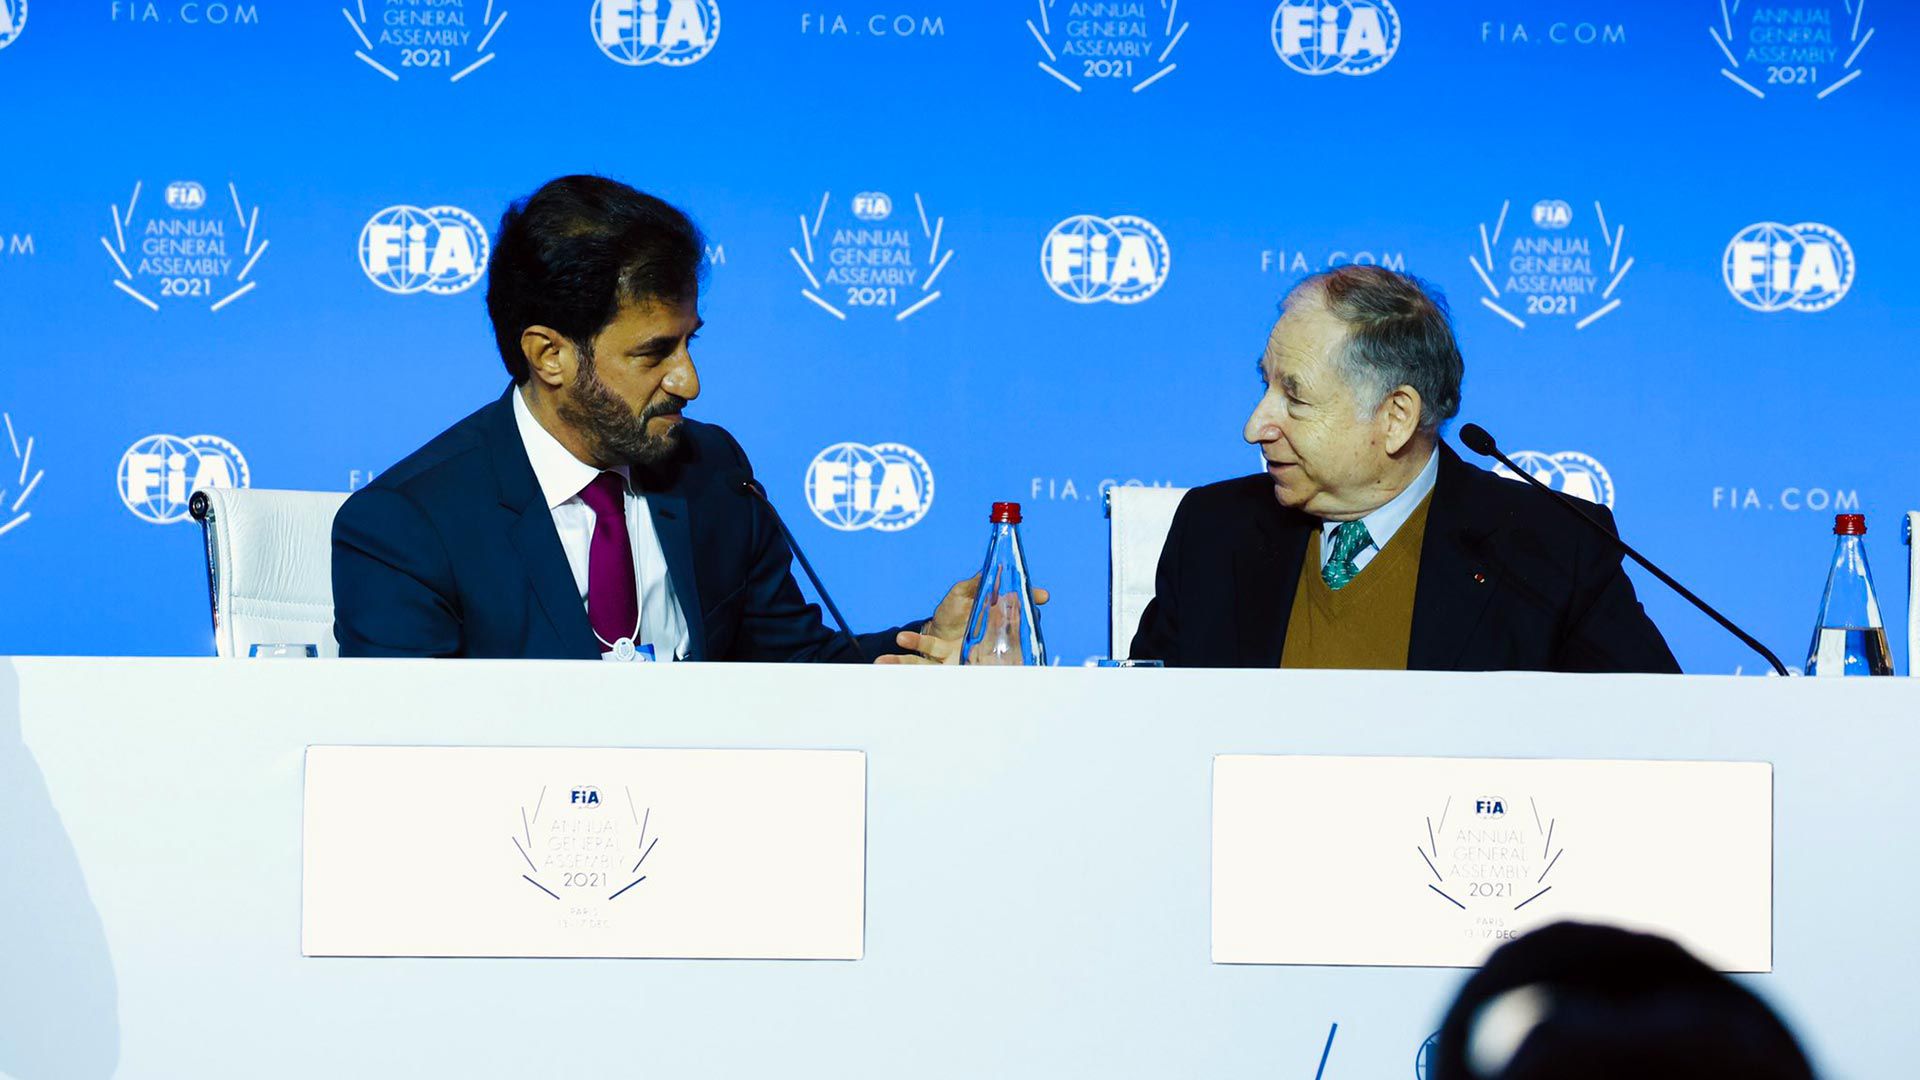 Mohammed Ben Sulayem FIA